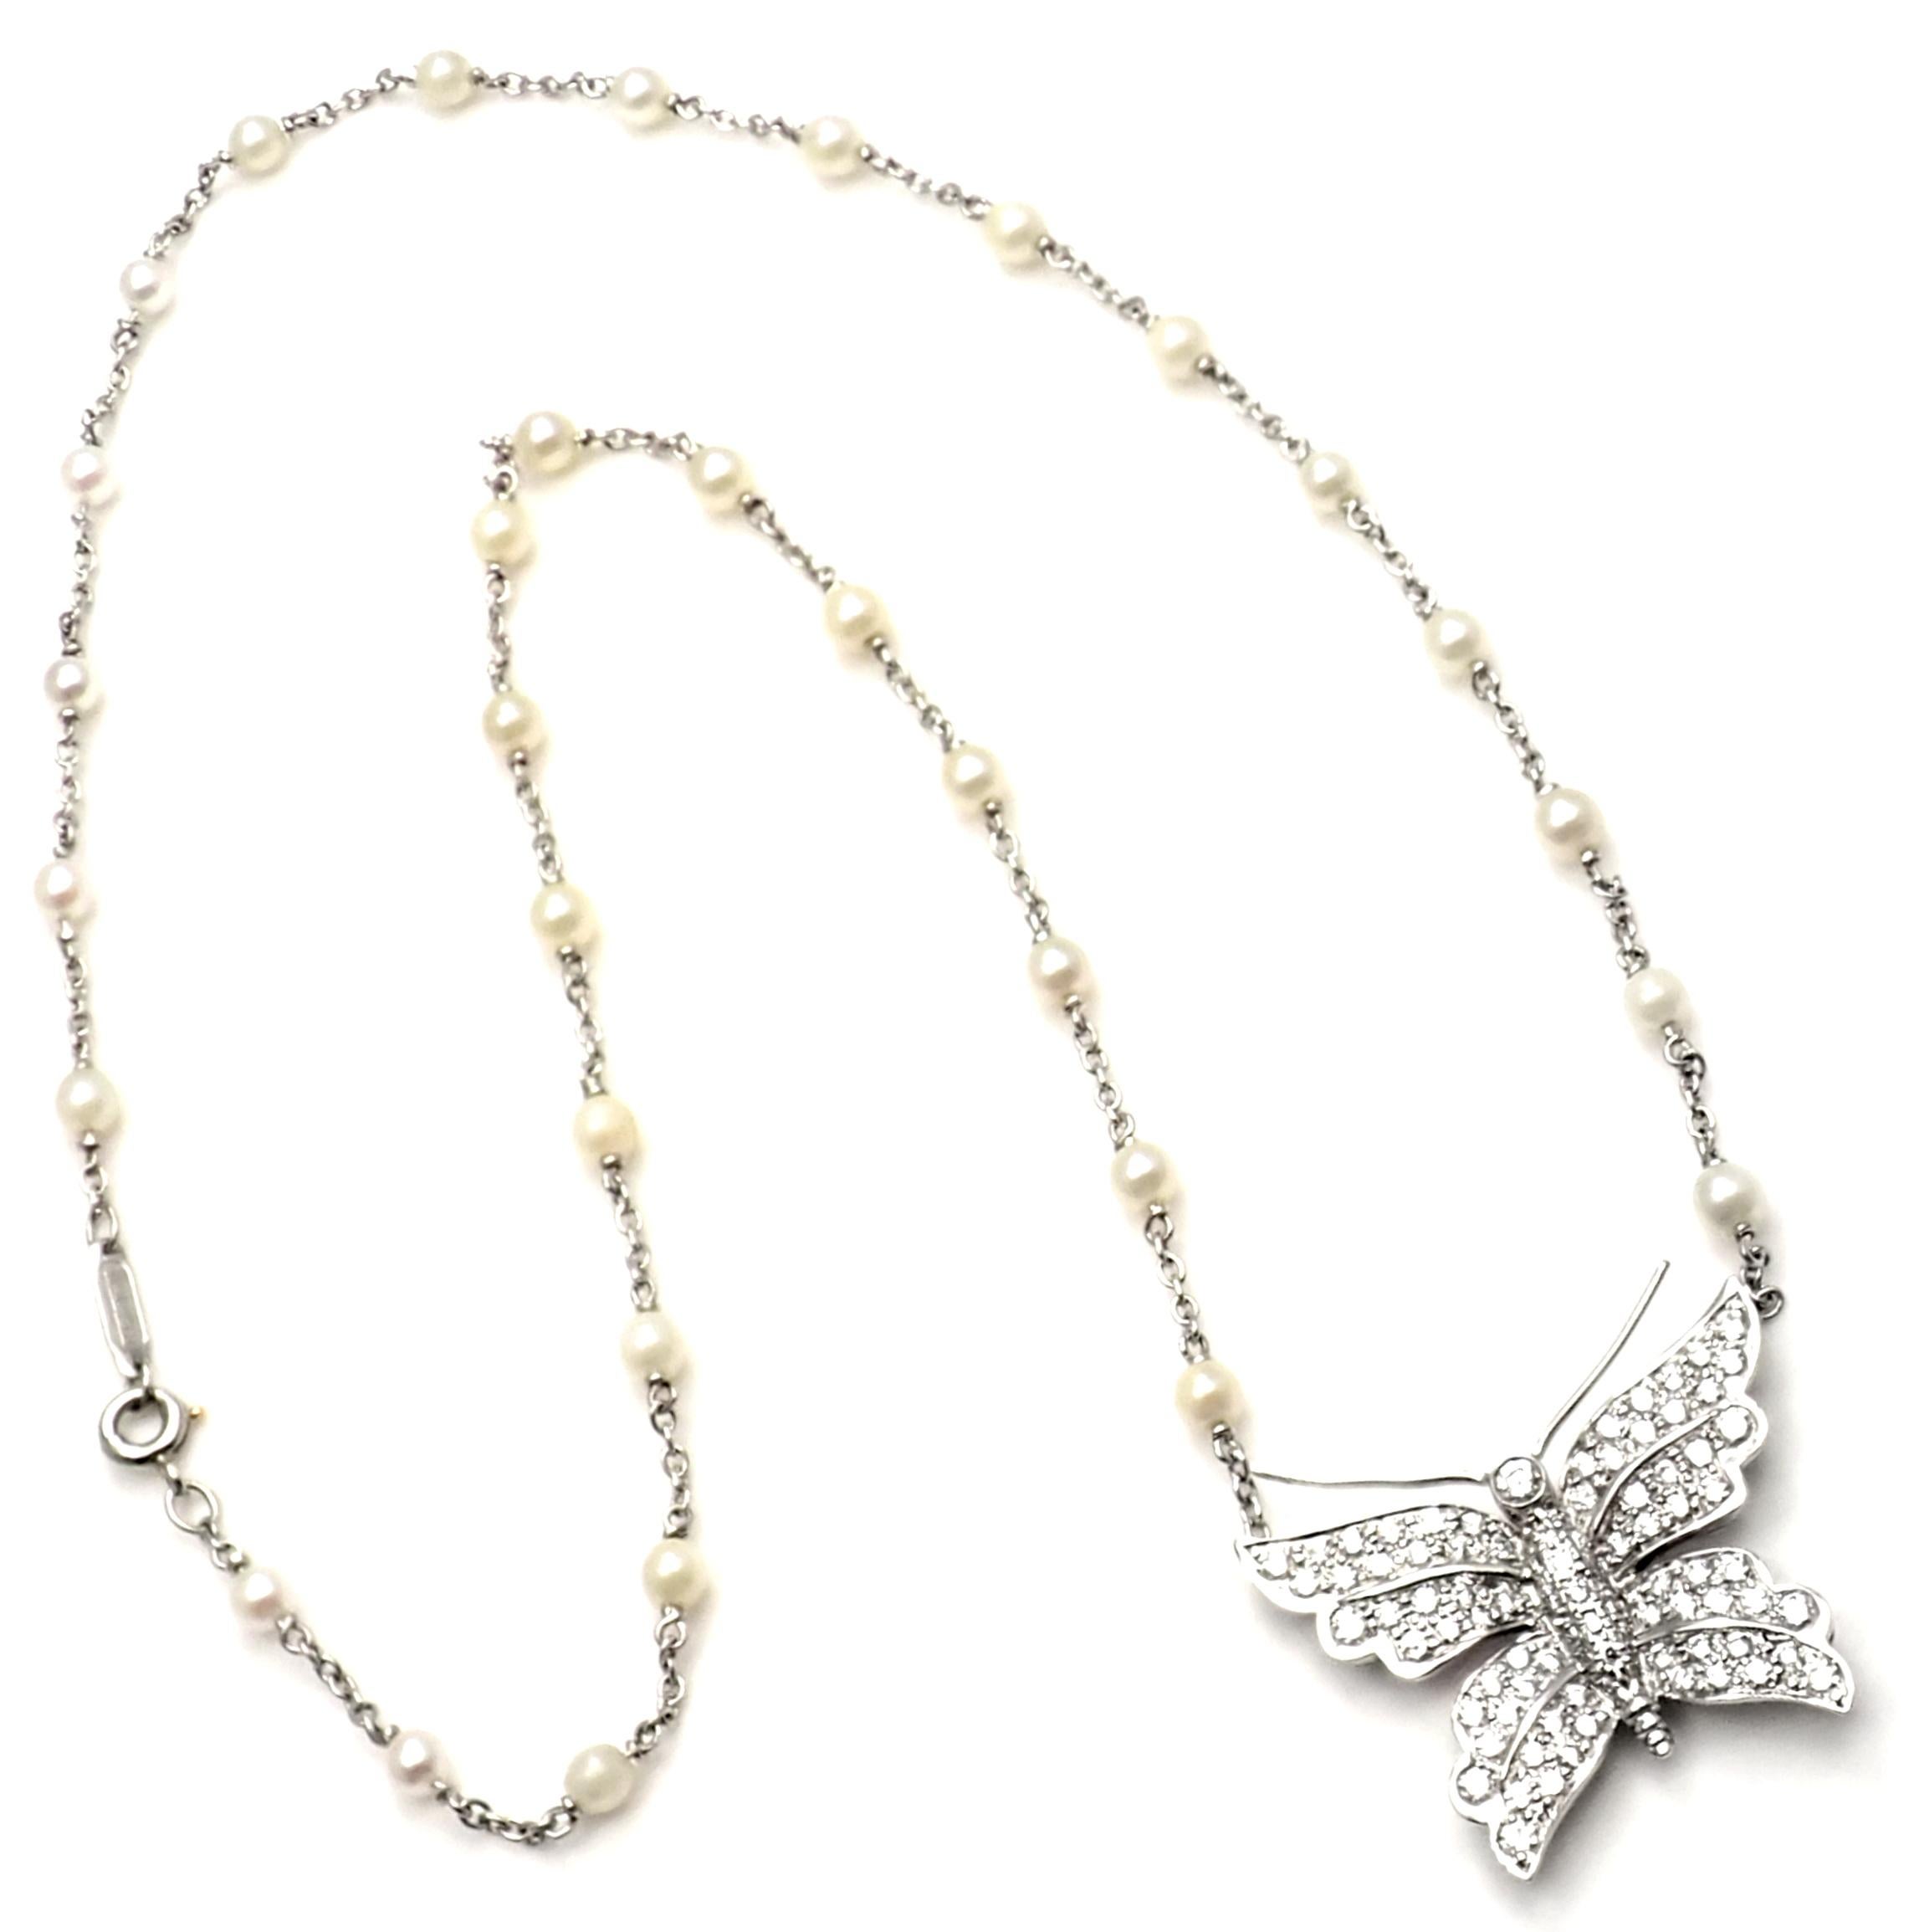 Platinum Diamond Butterfly Pearl Pendant Necklace by Tiffany & Co. 
90 Round brilliant cut diamonds VS1 clarity, G color total weight approx. 1.80ct 
32 pearls 3.5mm each
Details:
Length 18.5